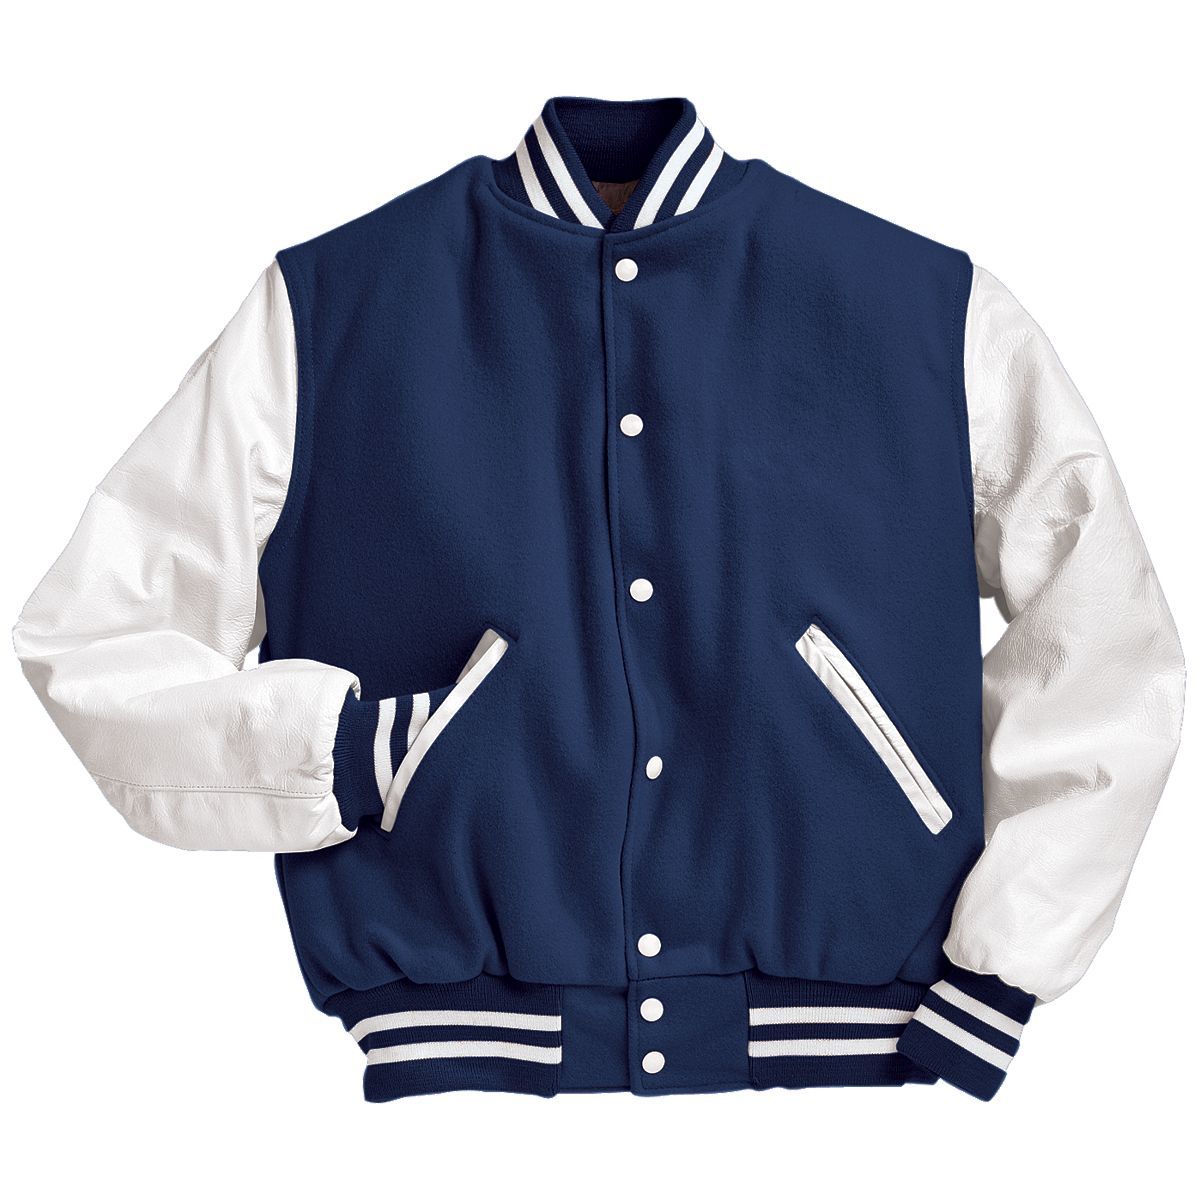 Holloway Varsity Tall Jacket in Dark Royal/White  -Part of the Adult, Adult-Jacket, Holloway, Outerwear product lines at KanaleyCreations.com